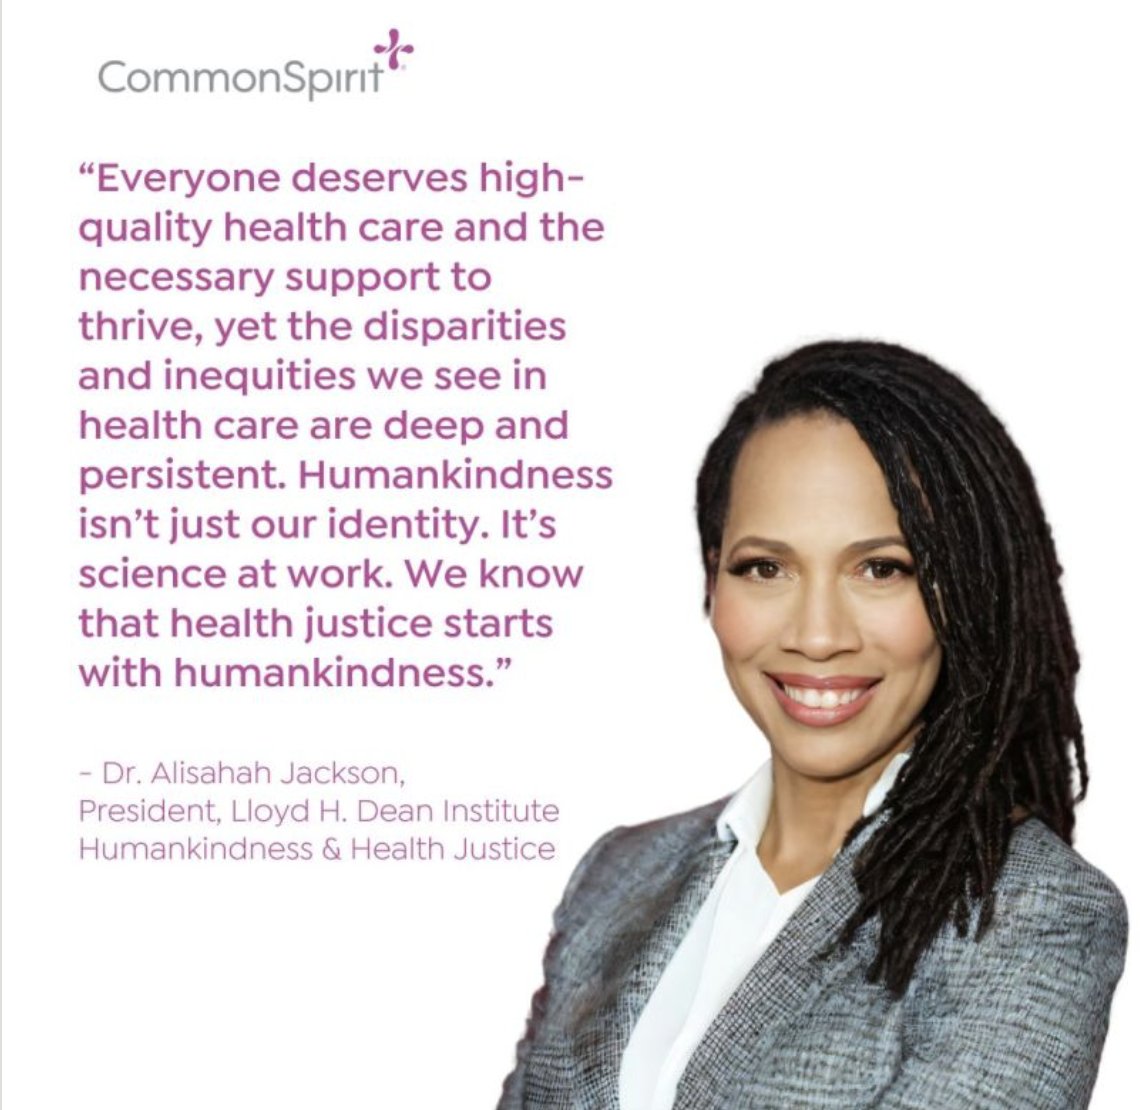 April is National Minority Health Month! At @CommonSpirit, we are committed to promoting health equity and raising awareness about the unique health challenges minority communities face. dignityhlth.org/49NtWGt @AlisahahMD